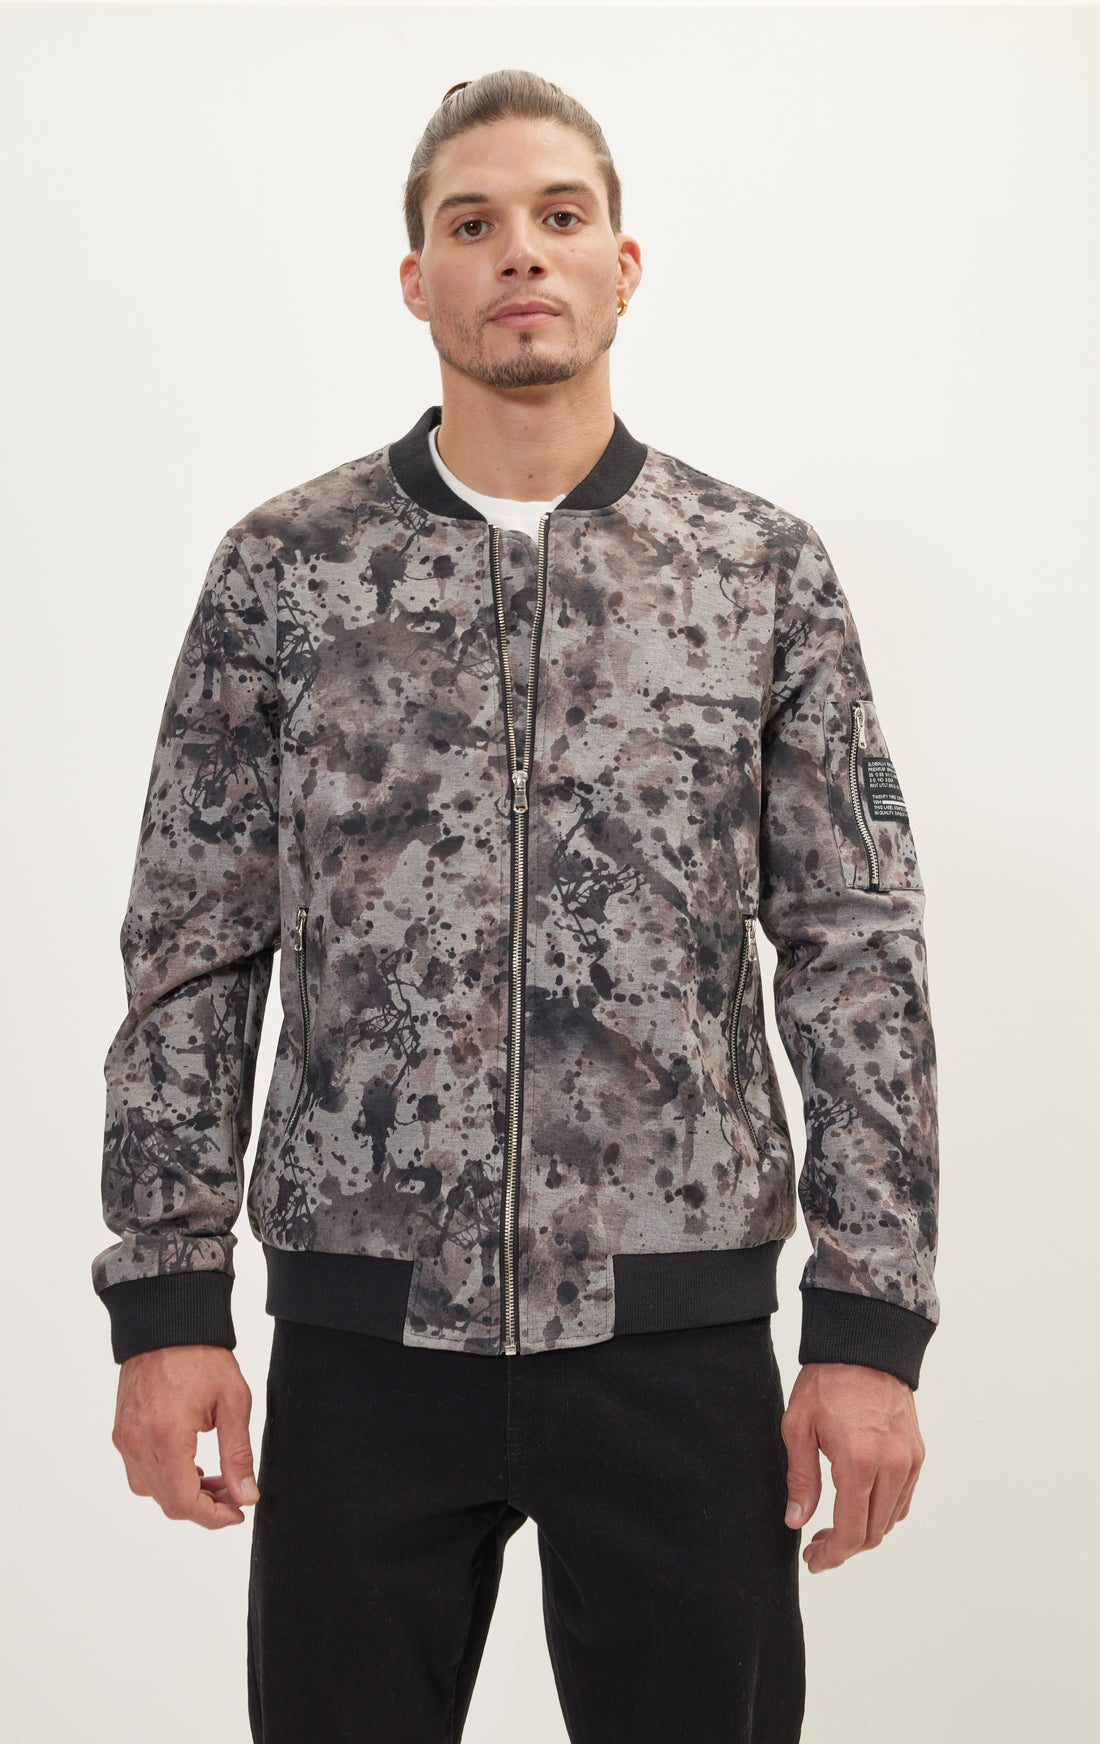 N° 71305 BOMBER ASTRATTO - CAMOUFLAGE